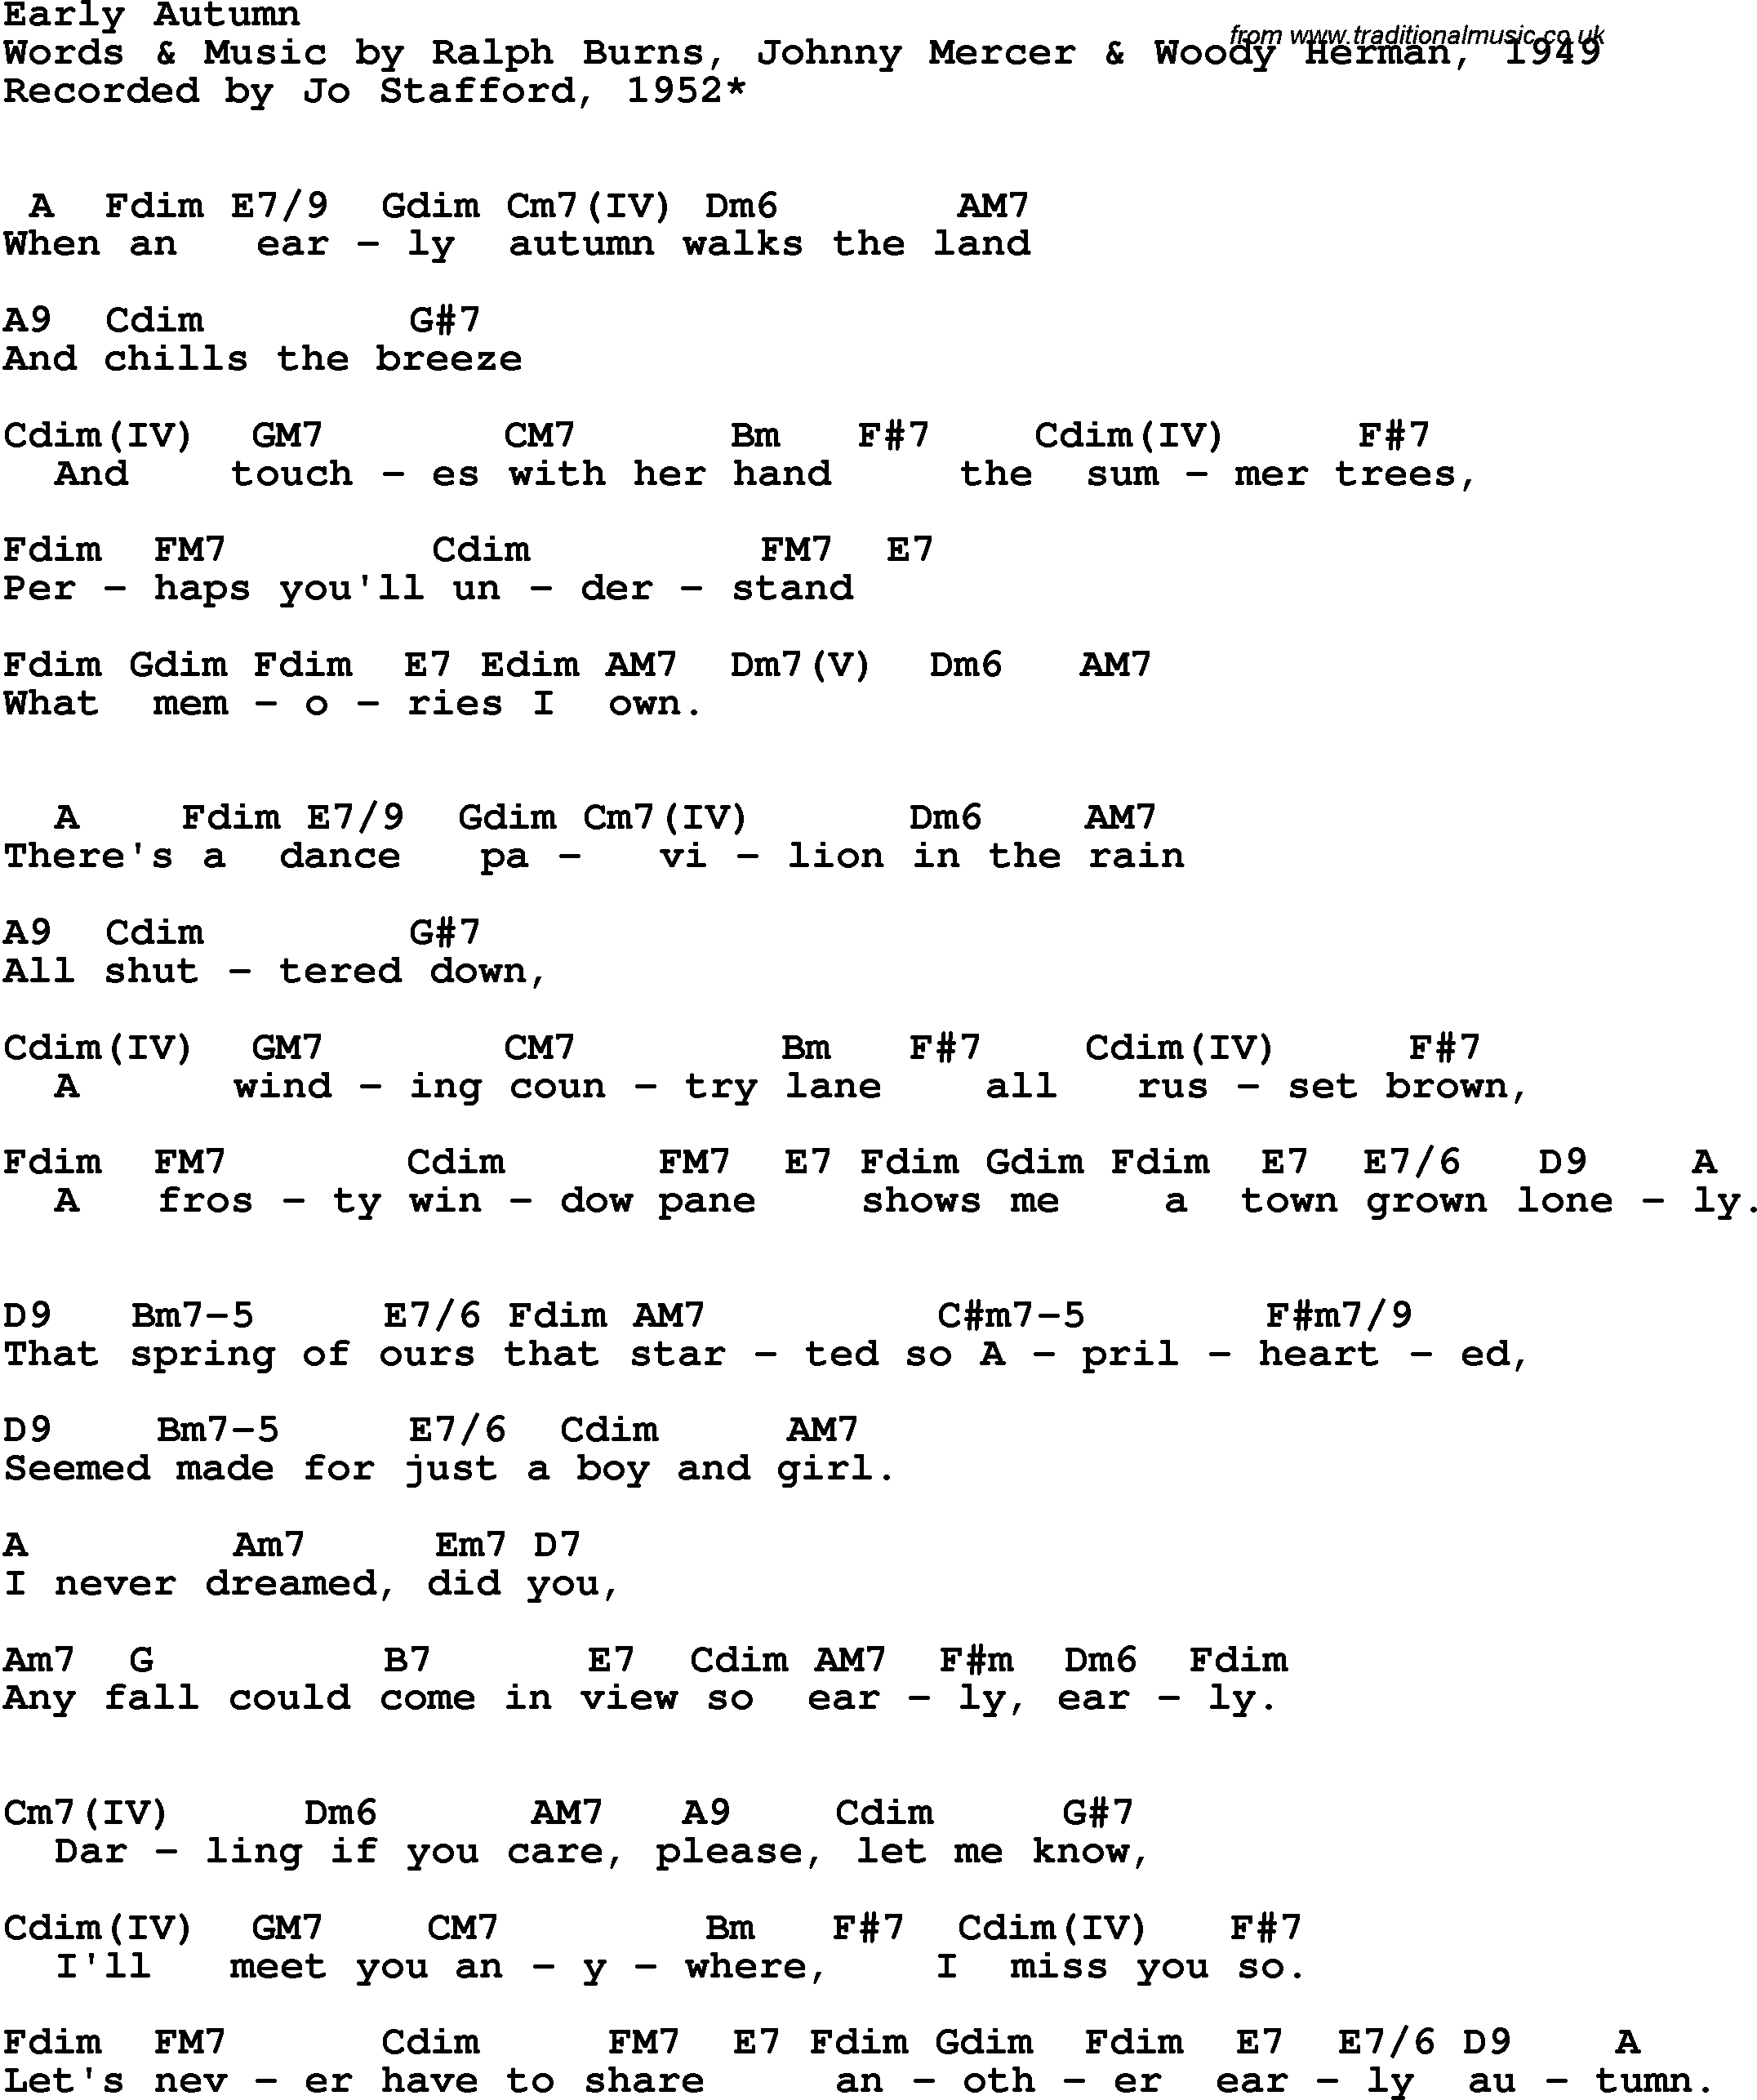 Song Lyrics with guitar chords for Early Autumn - Jo Stafford, 1952